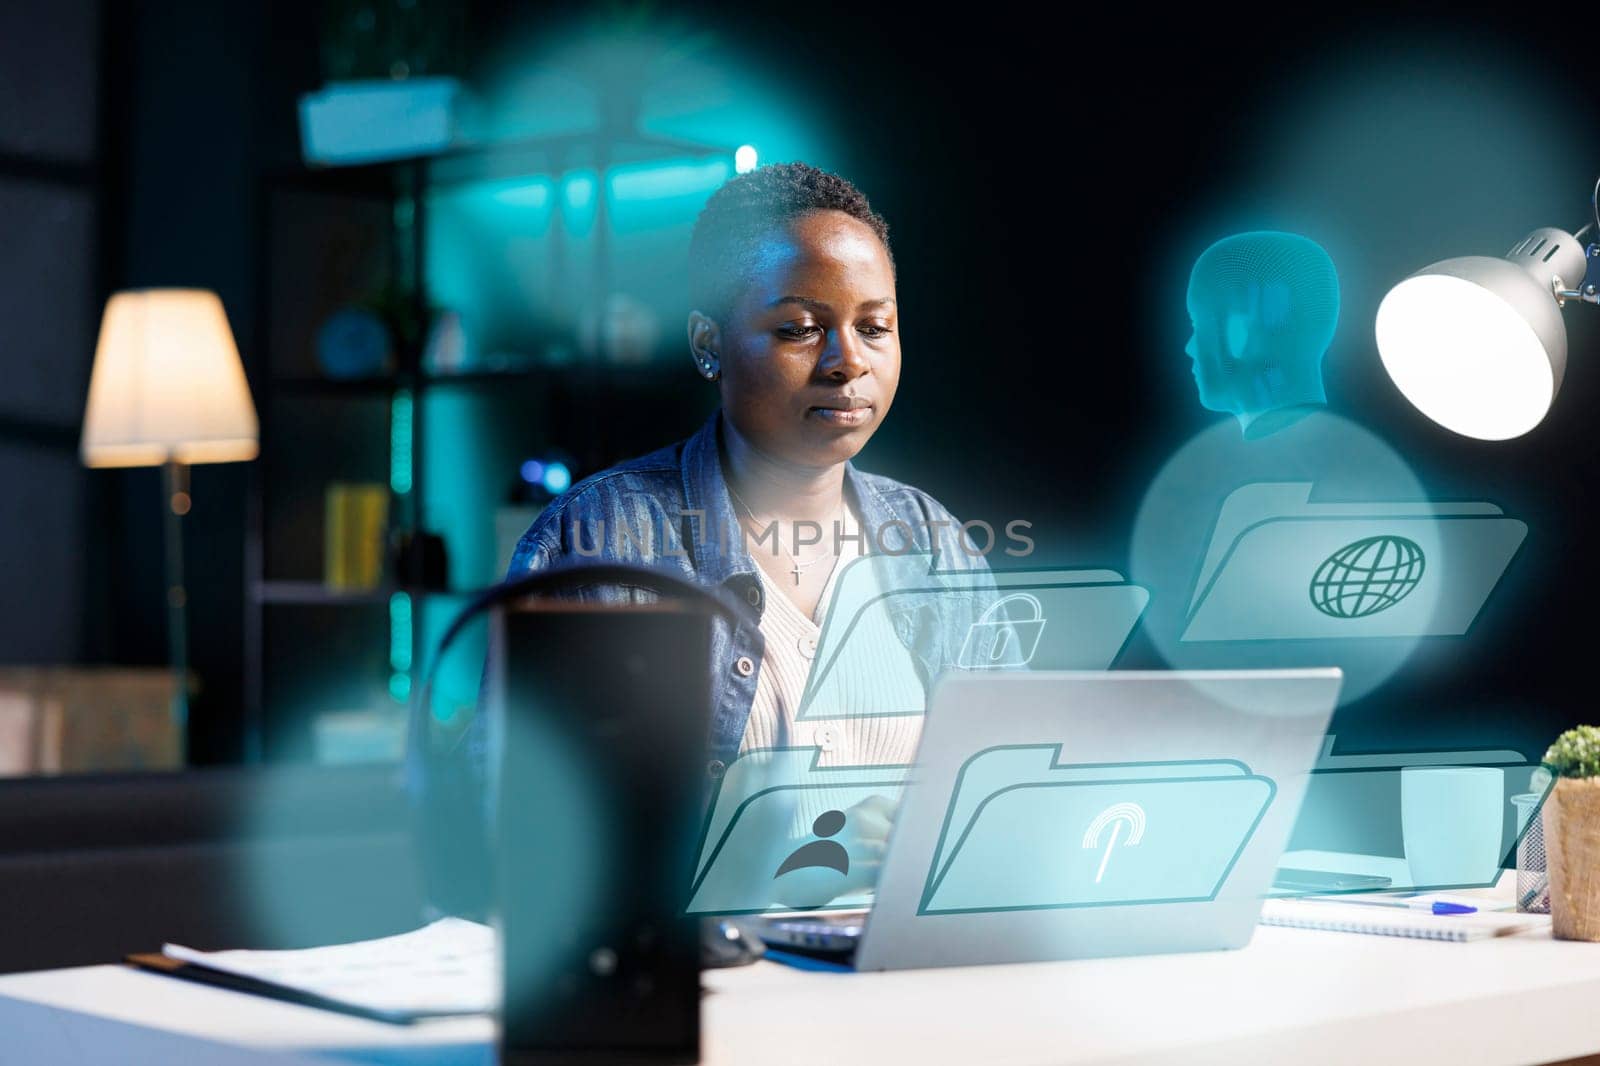 African american woman using laptop, interacting with artificial intelligence assistant using AR tech. BIPOC person working with AR technology, giving commands to virtual AI companion